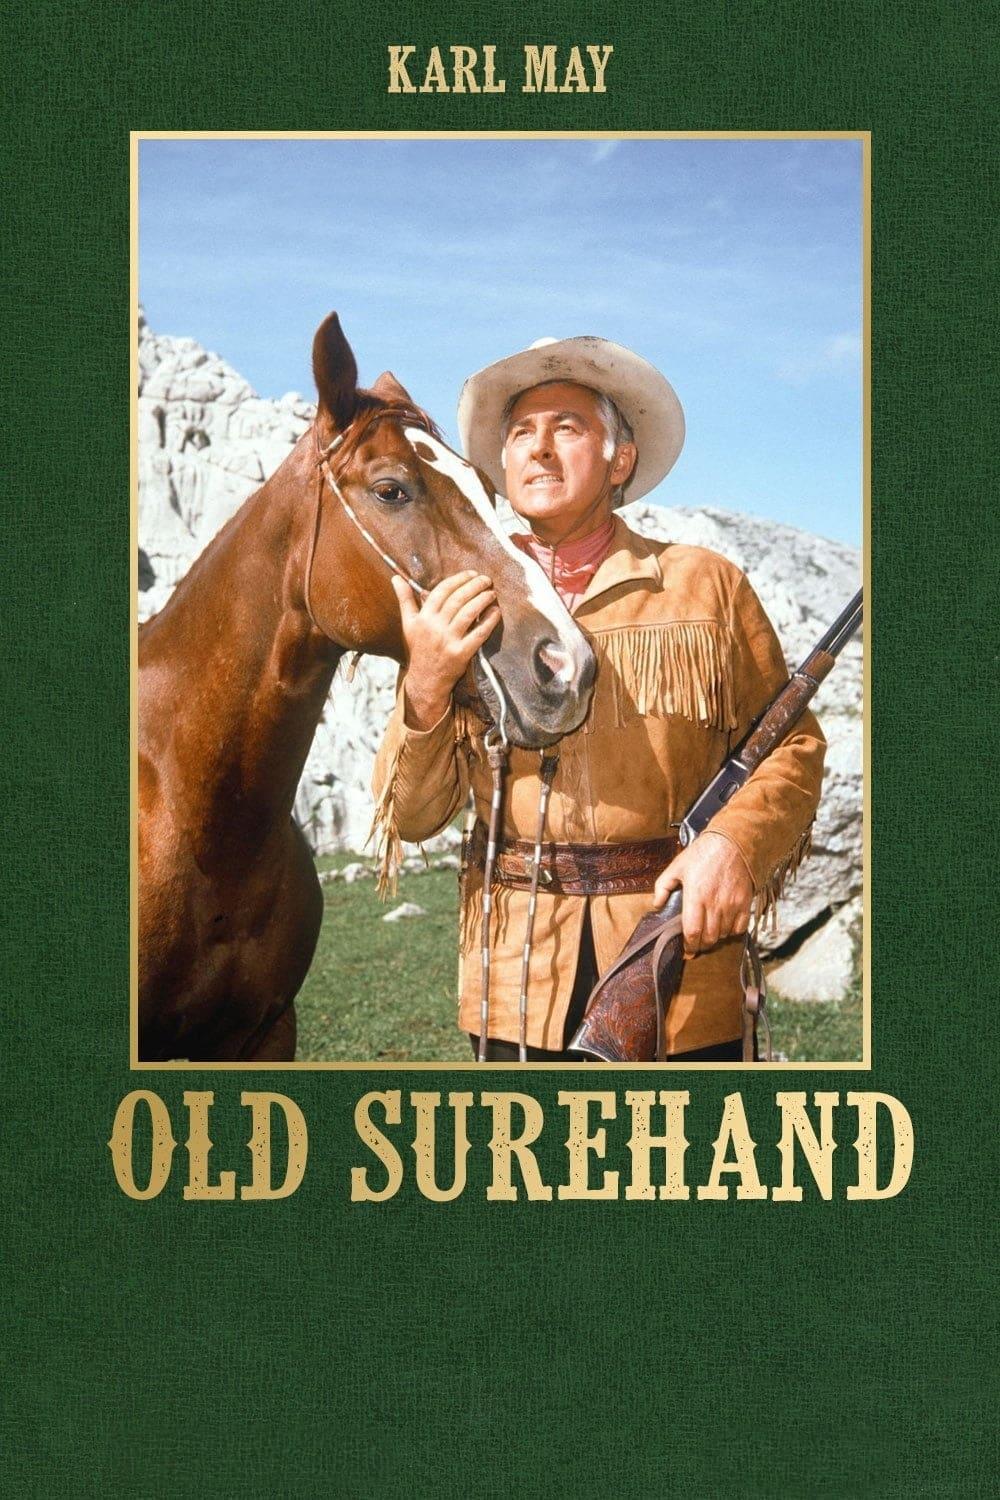 Old Surehand poster